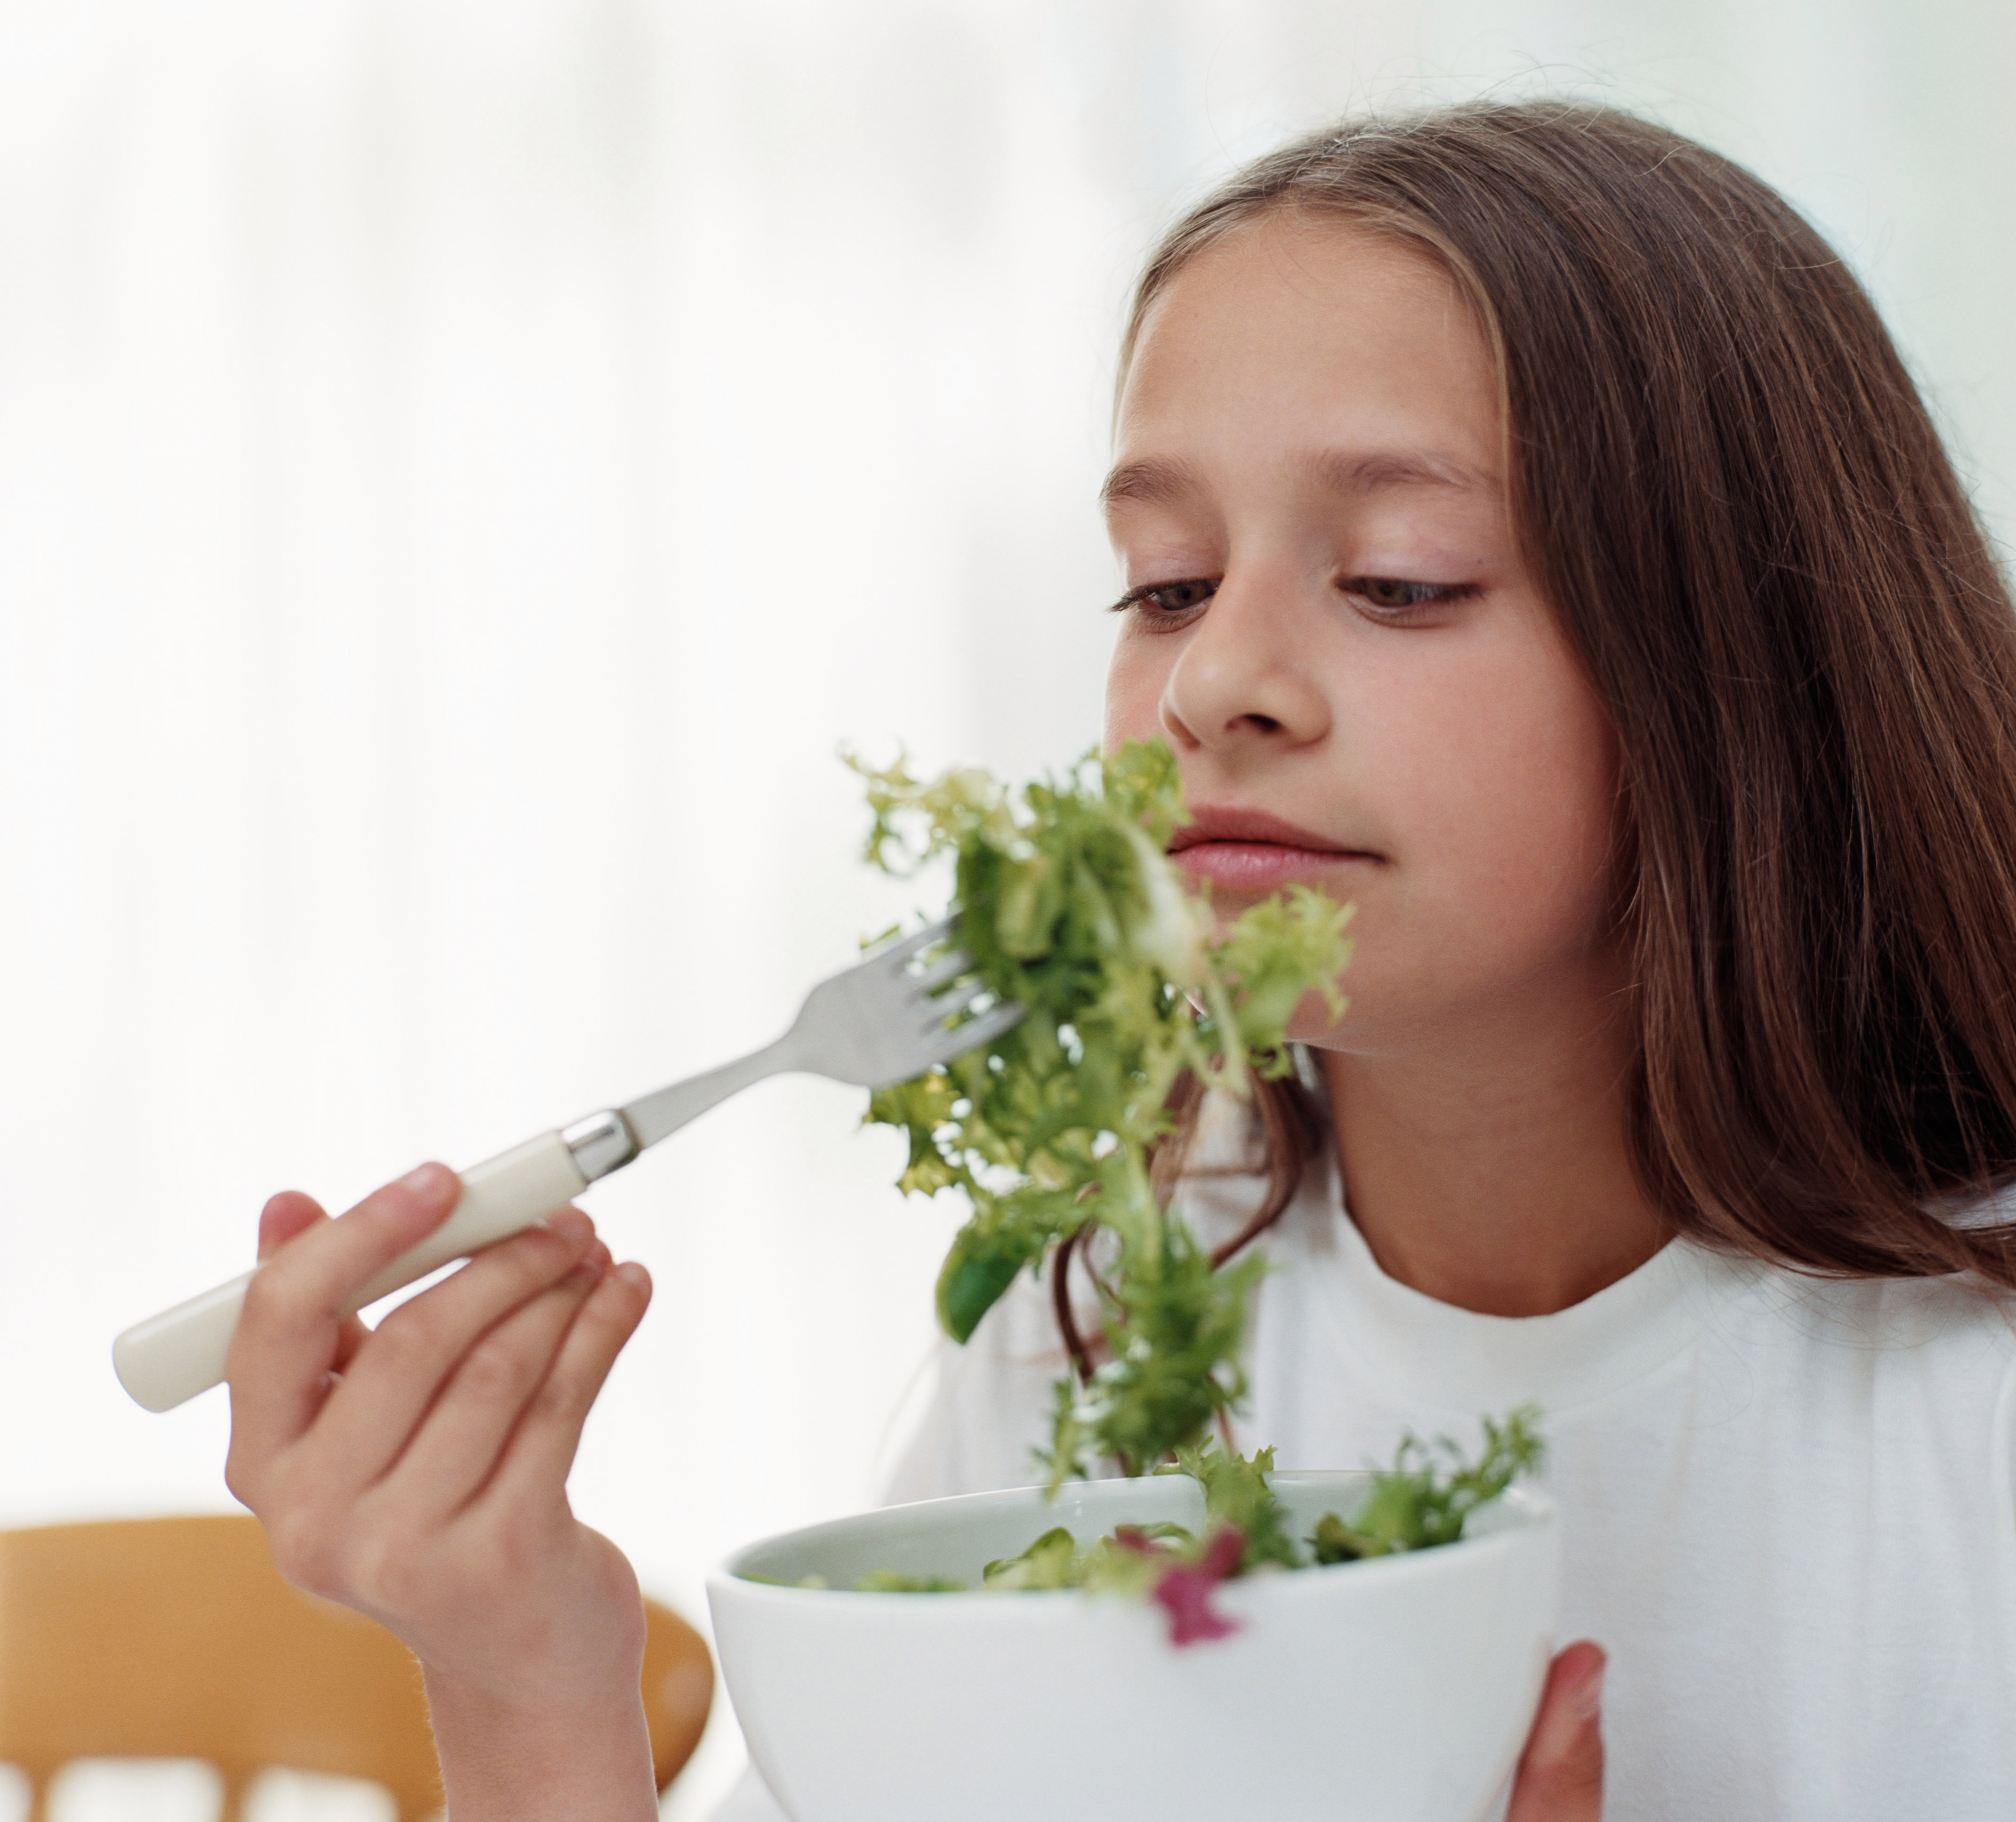 A study has found that nearly half of UK children believe they NEVER eat vegetables